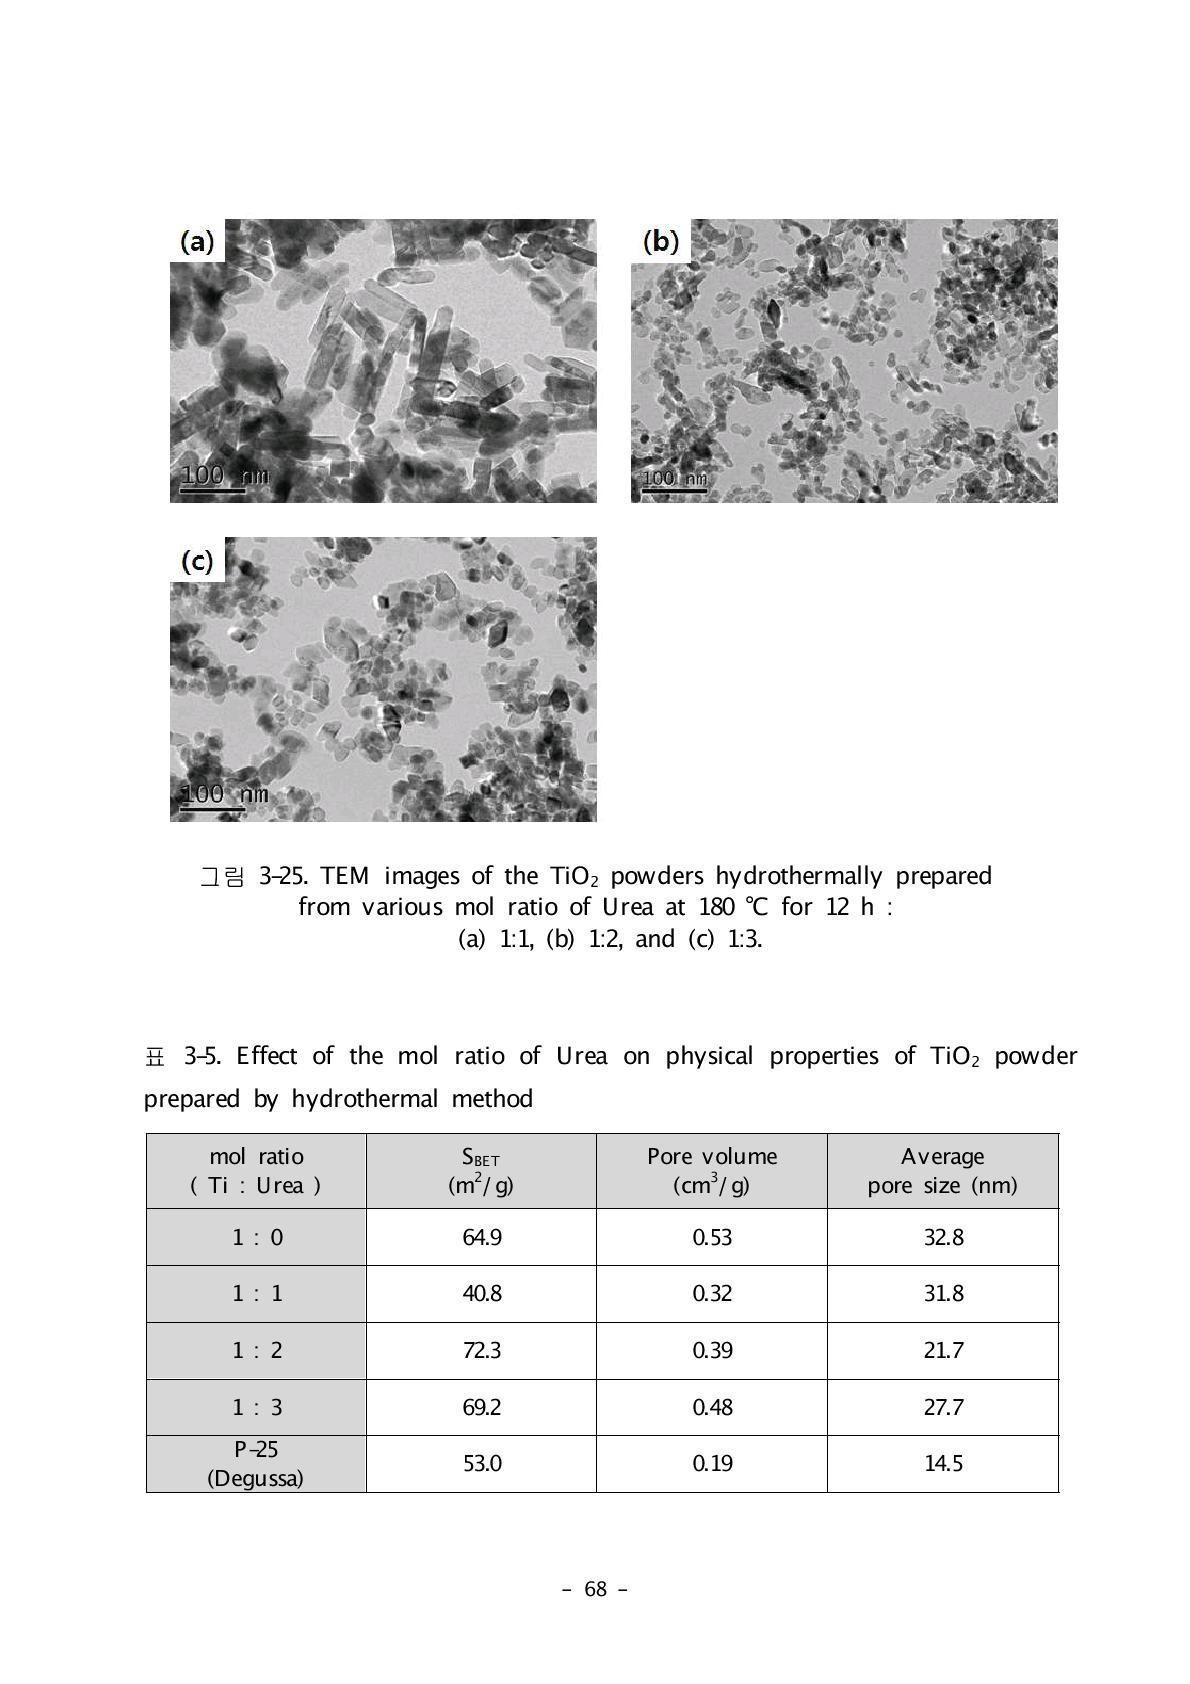 Effect of the mol ratio of Urea on physical properties of TiO2 powder